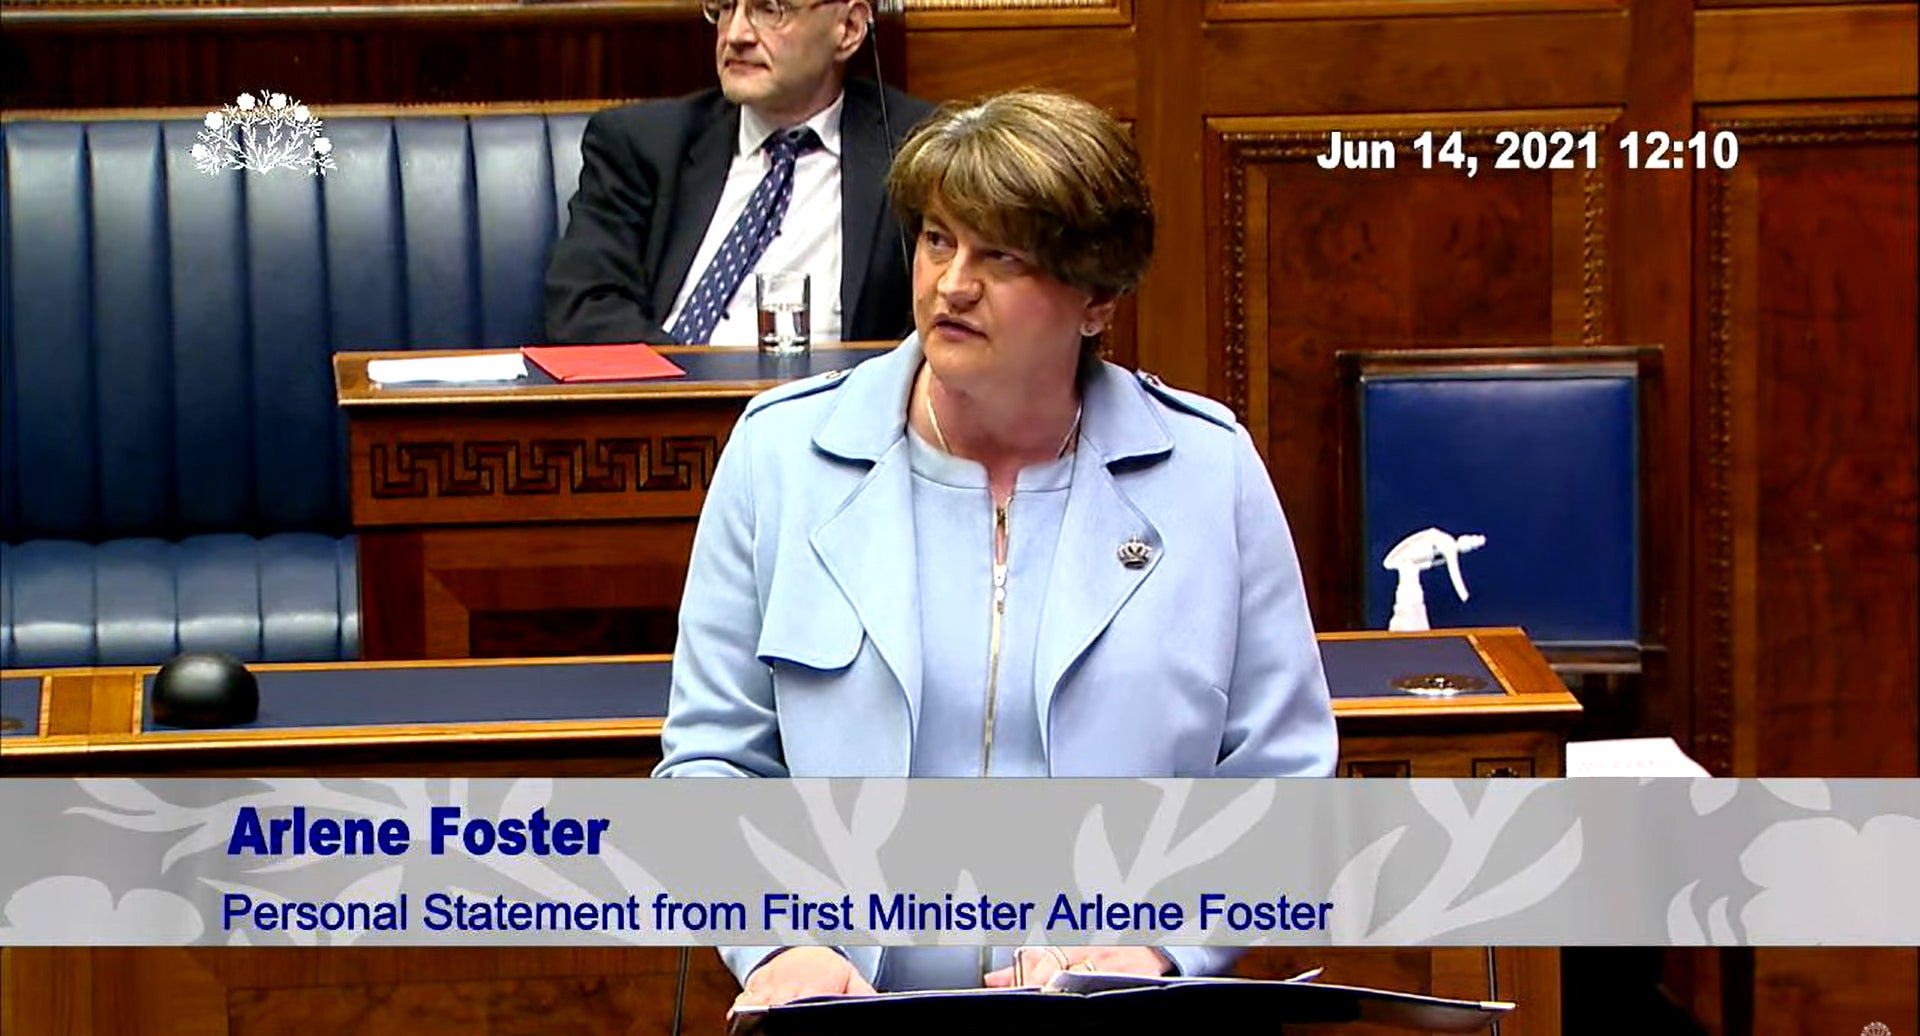 Screengrab taken from the Northern Ireland Assembly of Arlene Foster formally announcing her resignation as First Minister (PA)